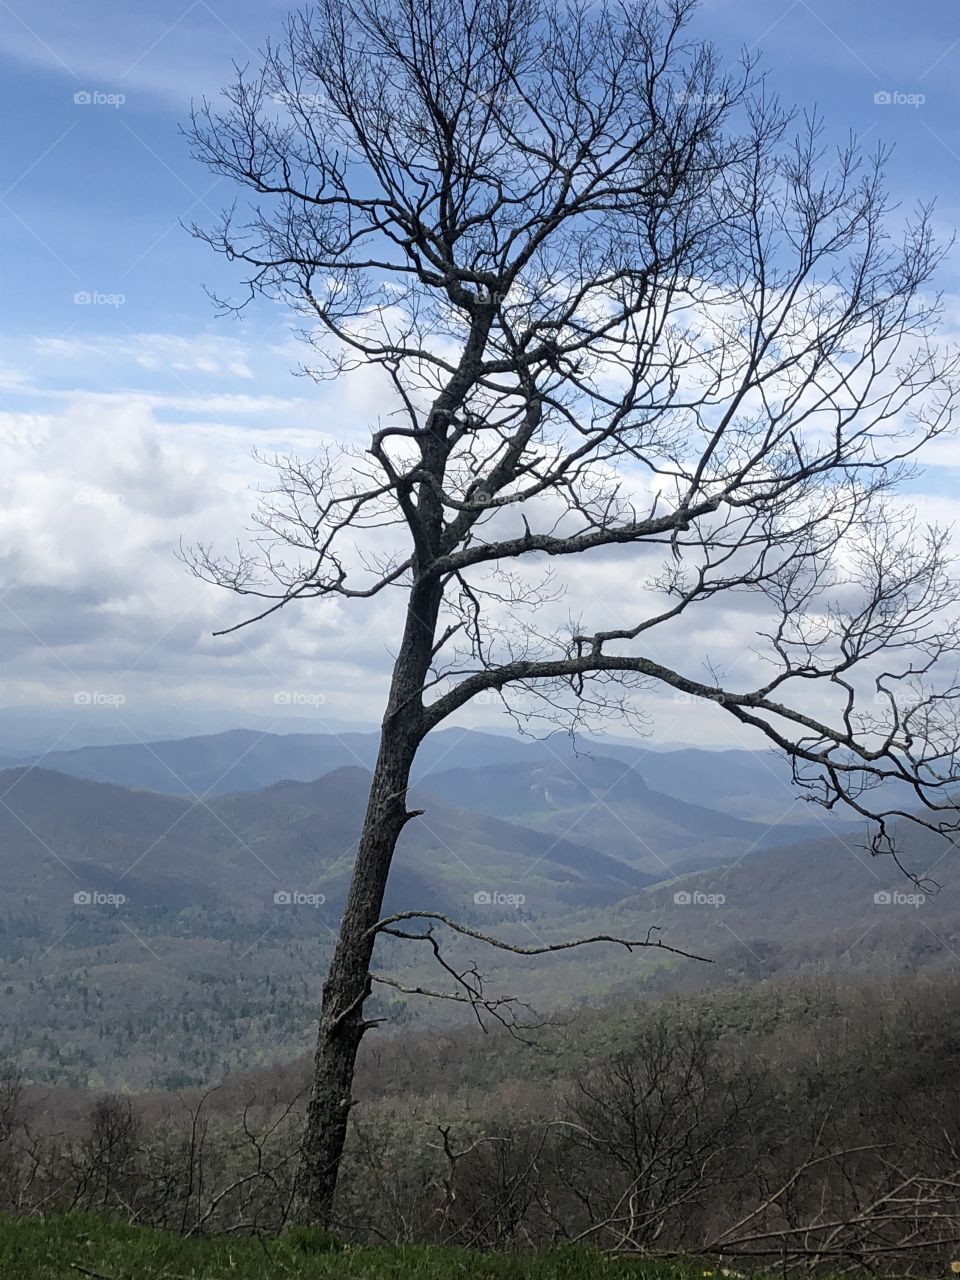 Lone bare tree against background of misty mountains along Blue Ridge Parkway.